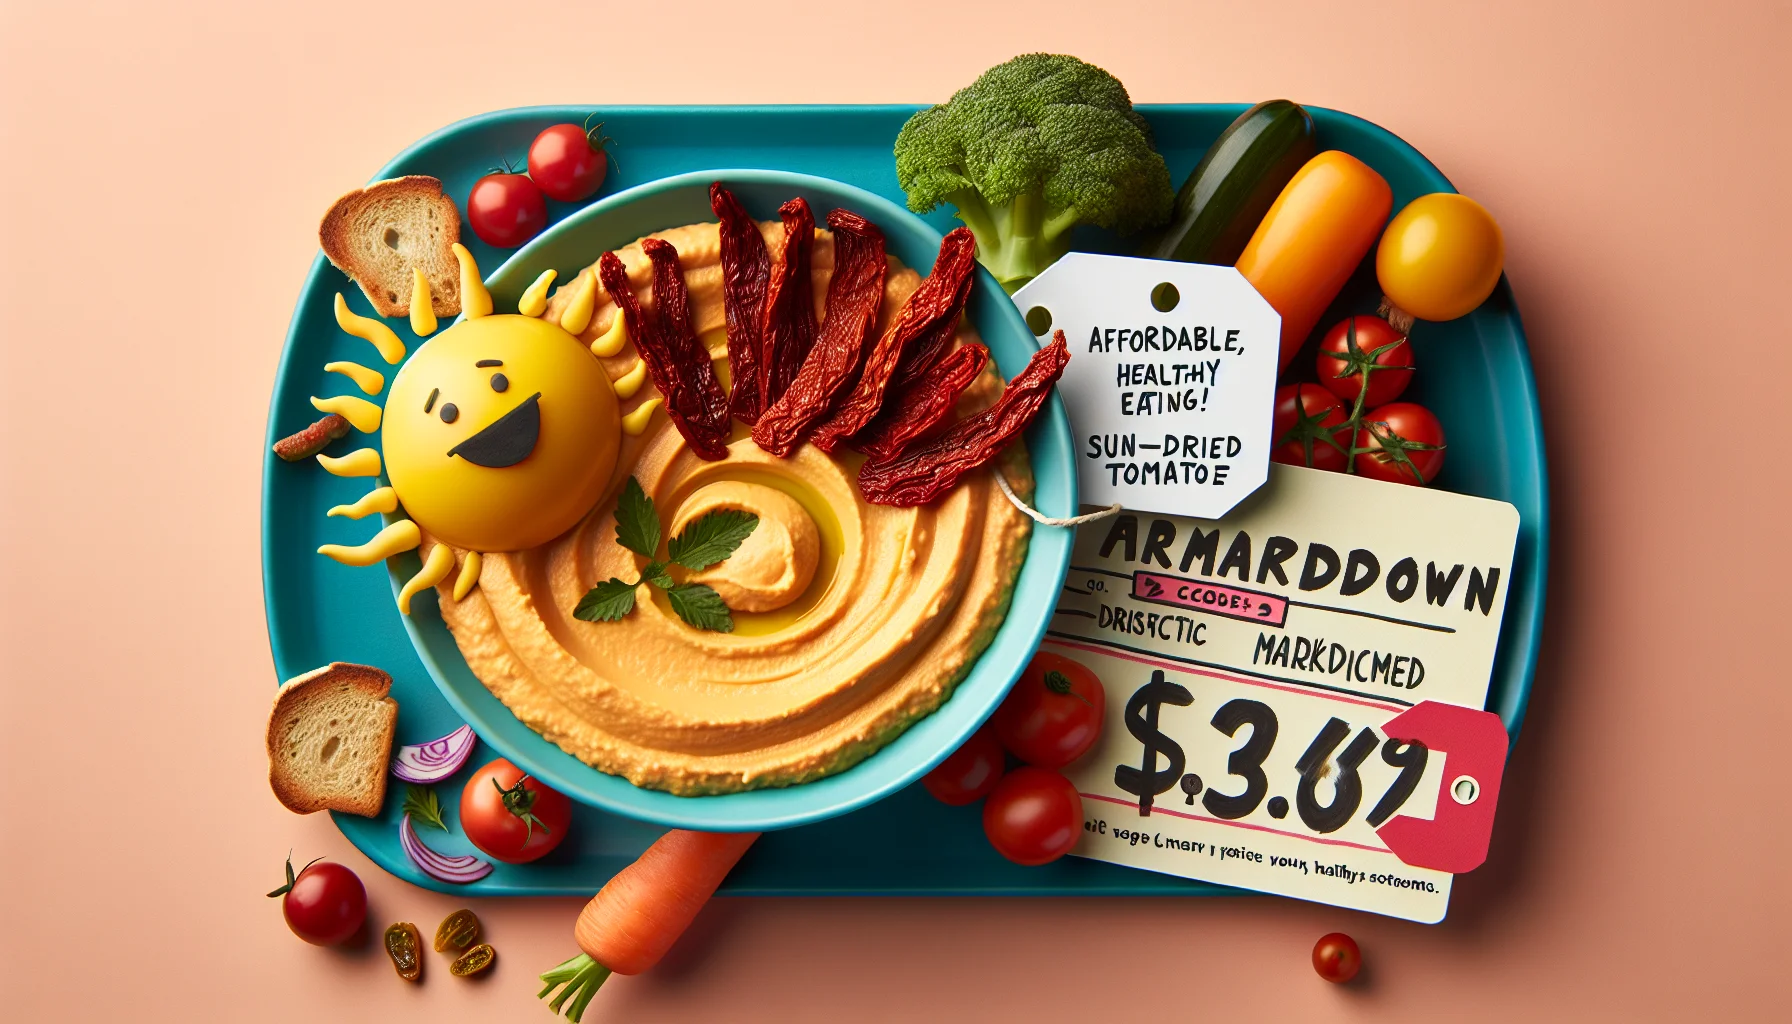 Imagine a humorous and inviting scene emphasizing affordable, healthy eating. In the center of the image lays a large vibrant bowl of sun-dried tomato hummus, garnished with fresh herbs and surrounded by colorful vegetables. On the side, there's an amusing visual metaphor for cost reduction: a price tag demonstrating drastic markdown. The overall atmosphere is light-hearted and friendly, with bright, warm colors, representing the sun which dried the tomatoes. Use your creativity to incorporate elements of fun and laughter into this lovely culinary scenario, inspiring viewers to choose healthier, less expensive food options.